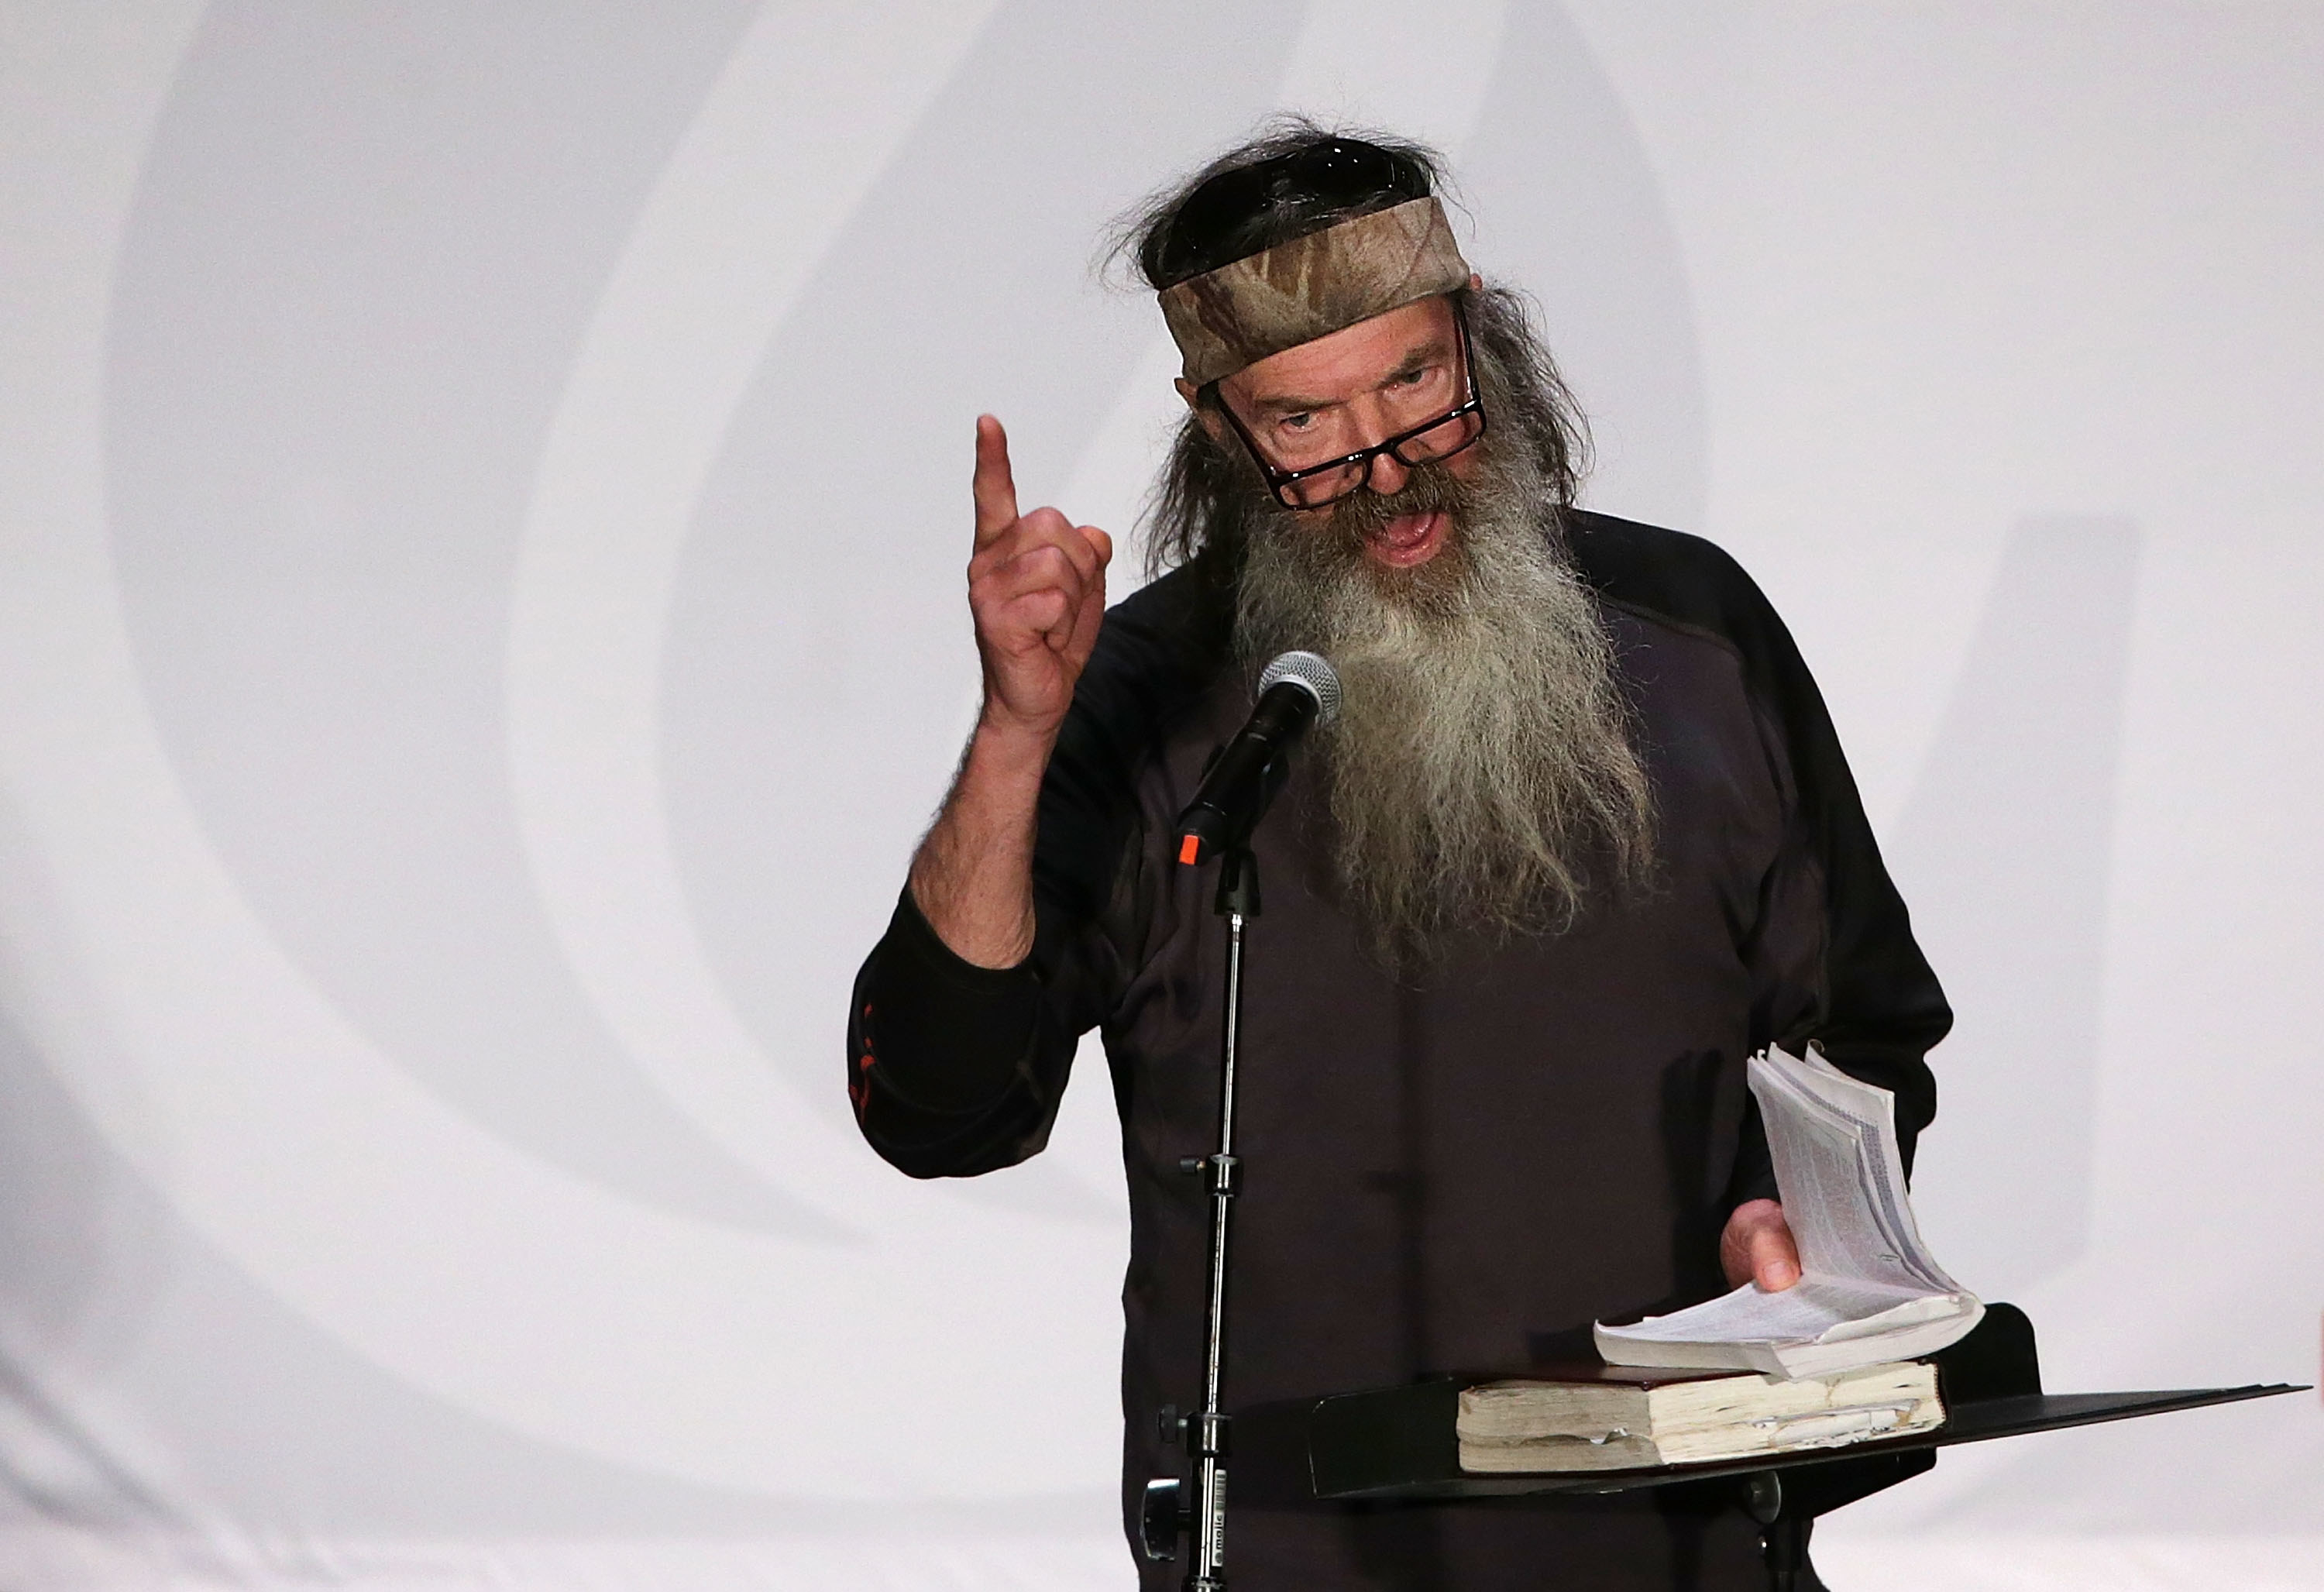 Phil Robertson speaking to a crowd onstage